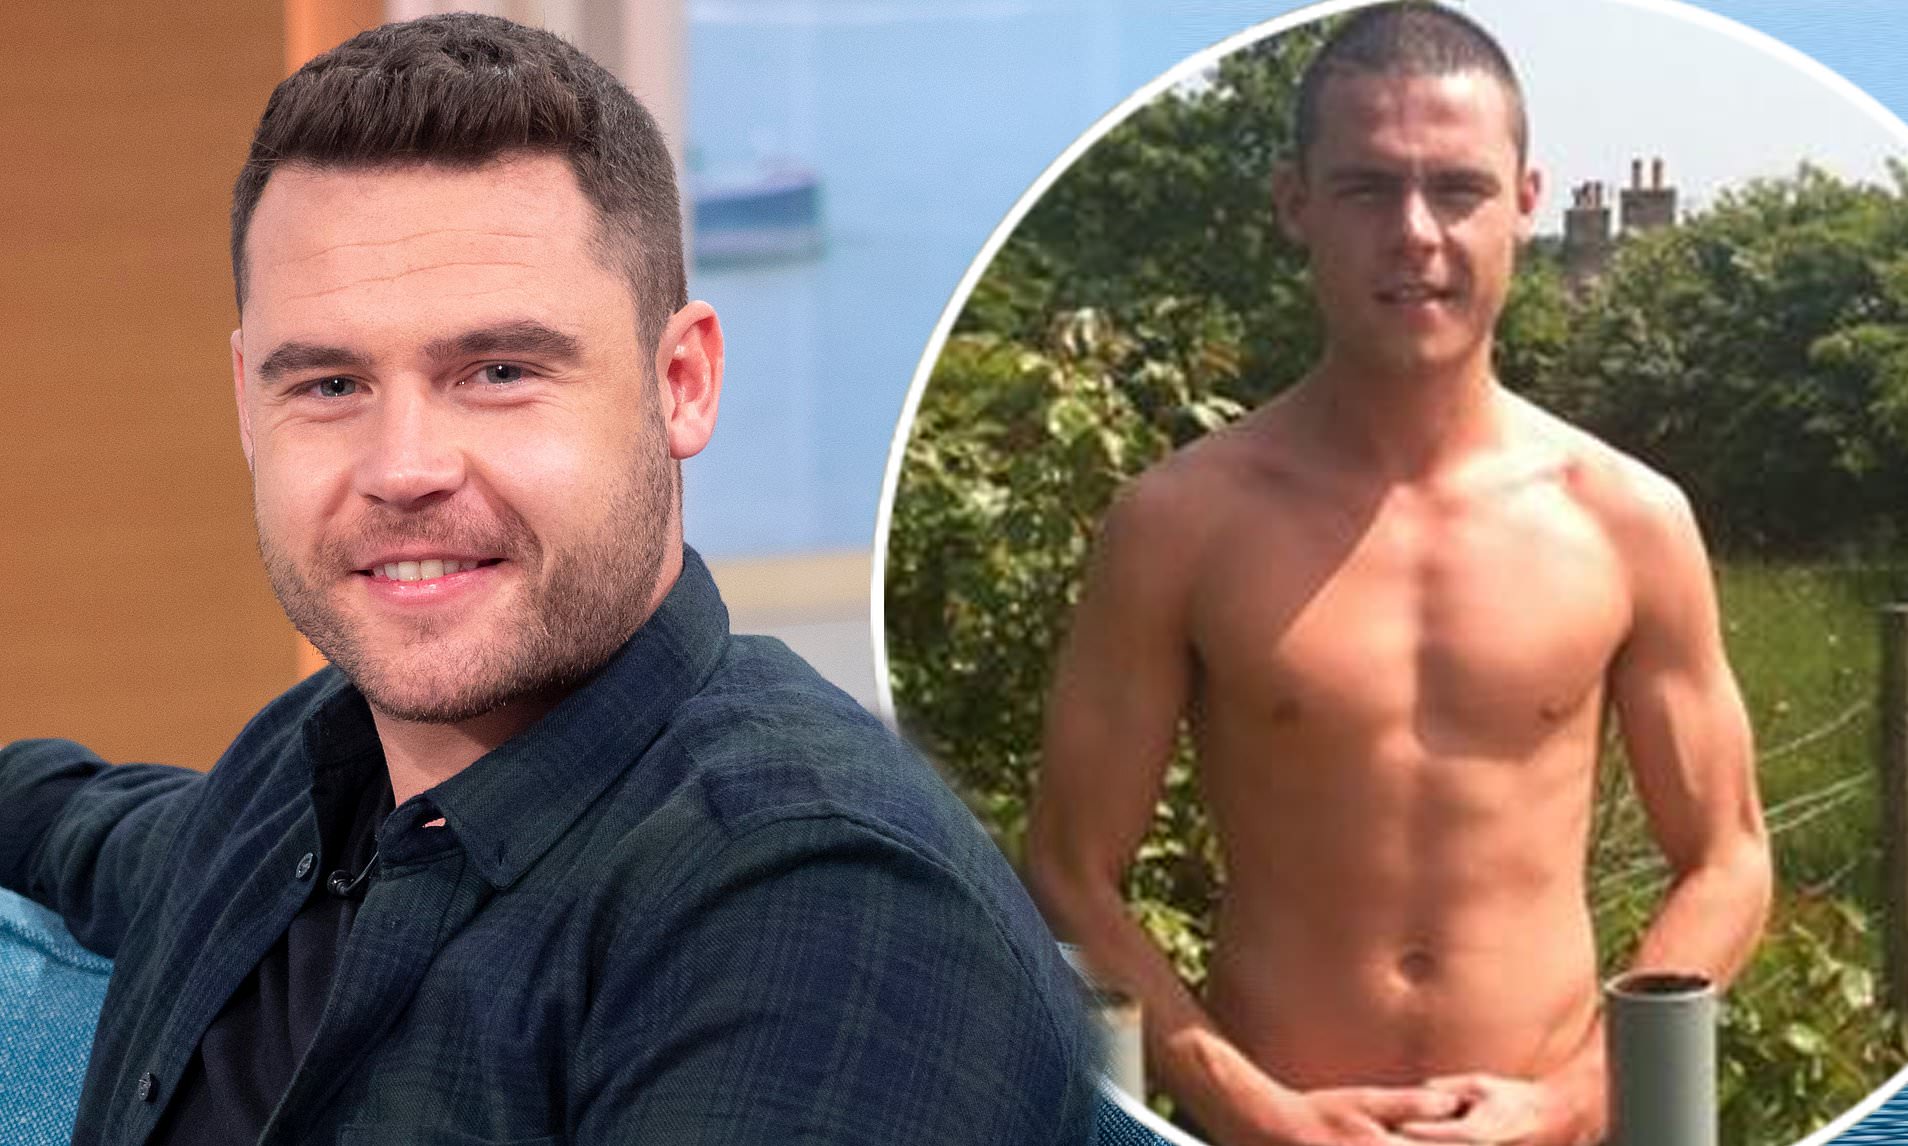 Emmerdale Star Danny Miller Welcomes Another Bundle Of Joy As Wife Steph Gives Birth To Second